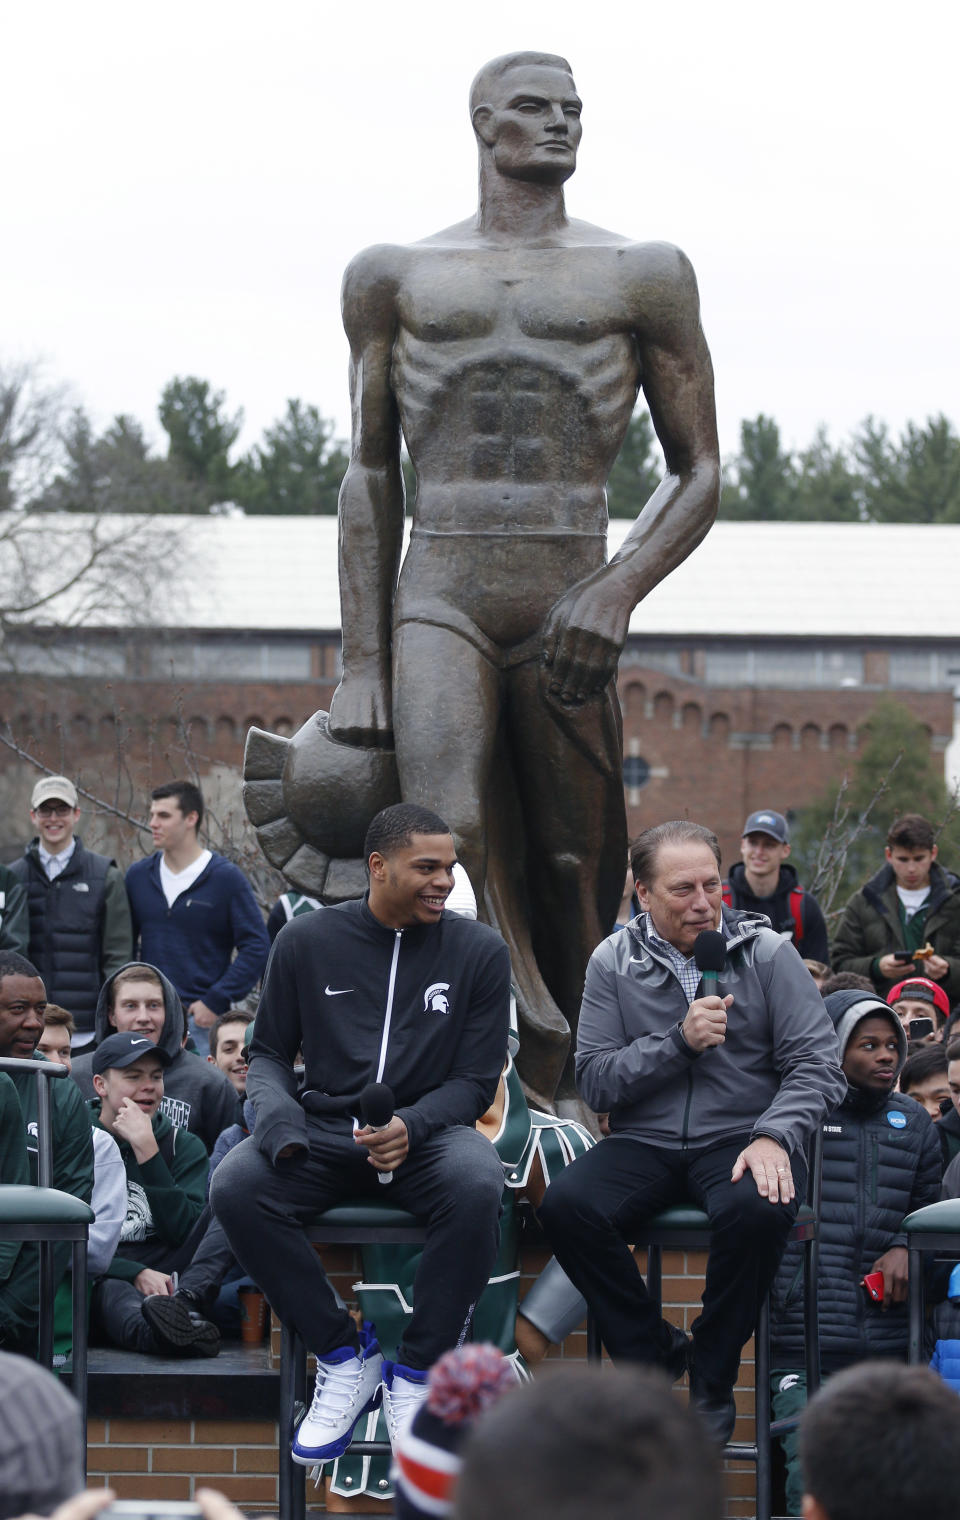 Michigan State's Miles Bridges, left, listens as men's basketball coach Tom Izzo, right, speaks during an NCAA college basketball news conference, Thursday, April 13, 2017, in East Lansing, Mich. Bridges, a 6-foot-7 forward from Flint, Mich., announced he is returning for his sophomore season. (AP Photo/Al Goldis)